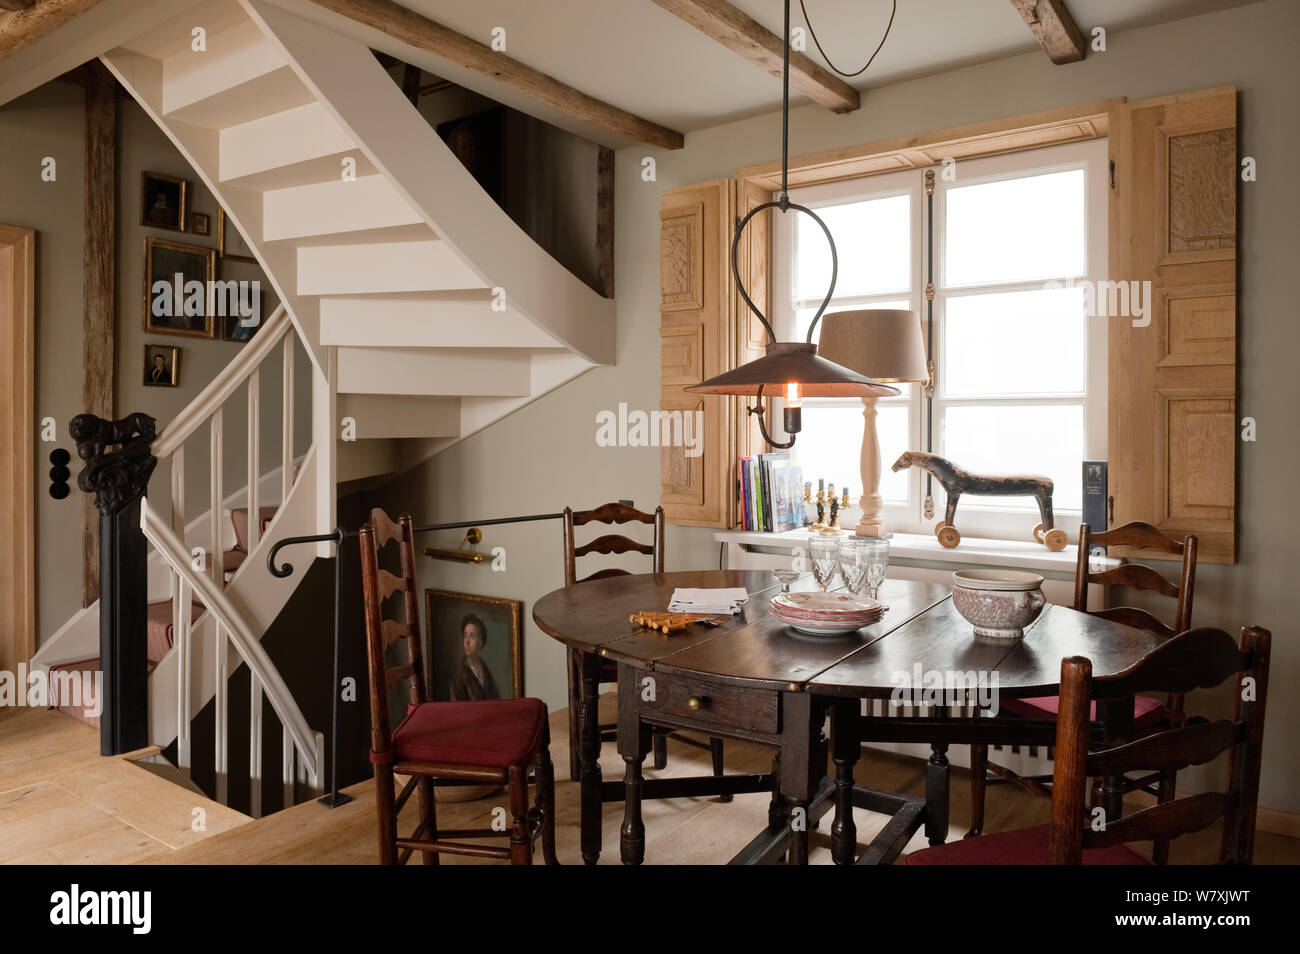 Victorian style dining room by spiral staircase Stock Photo